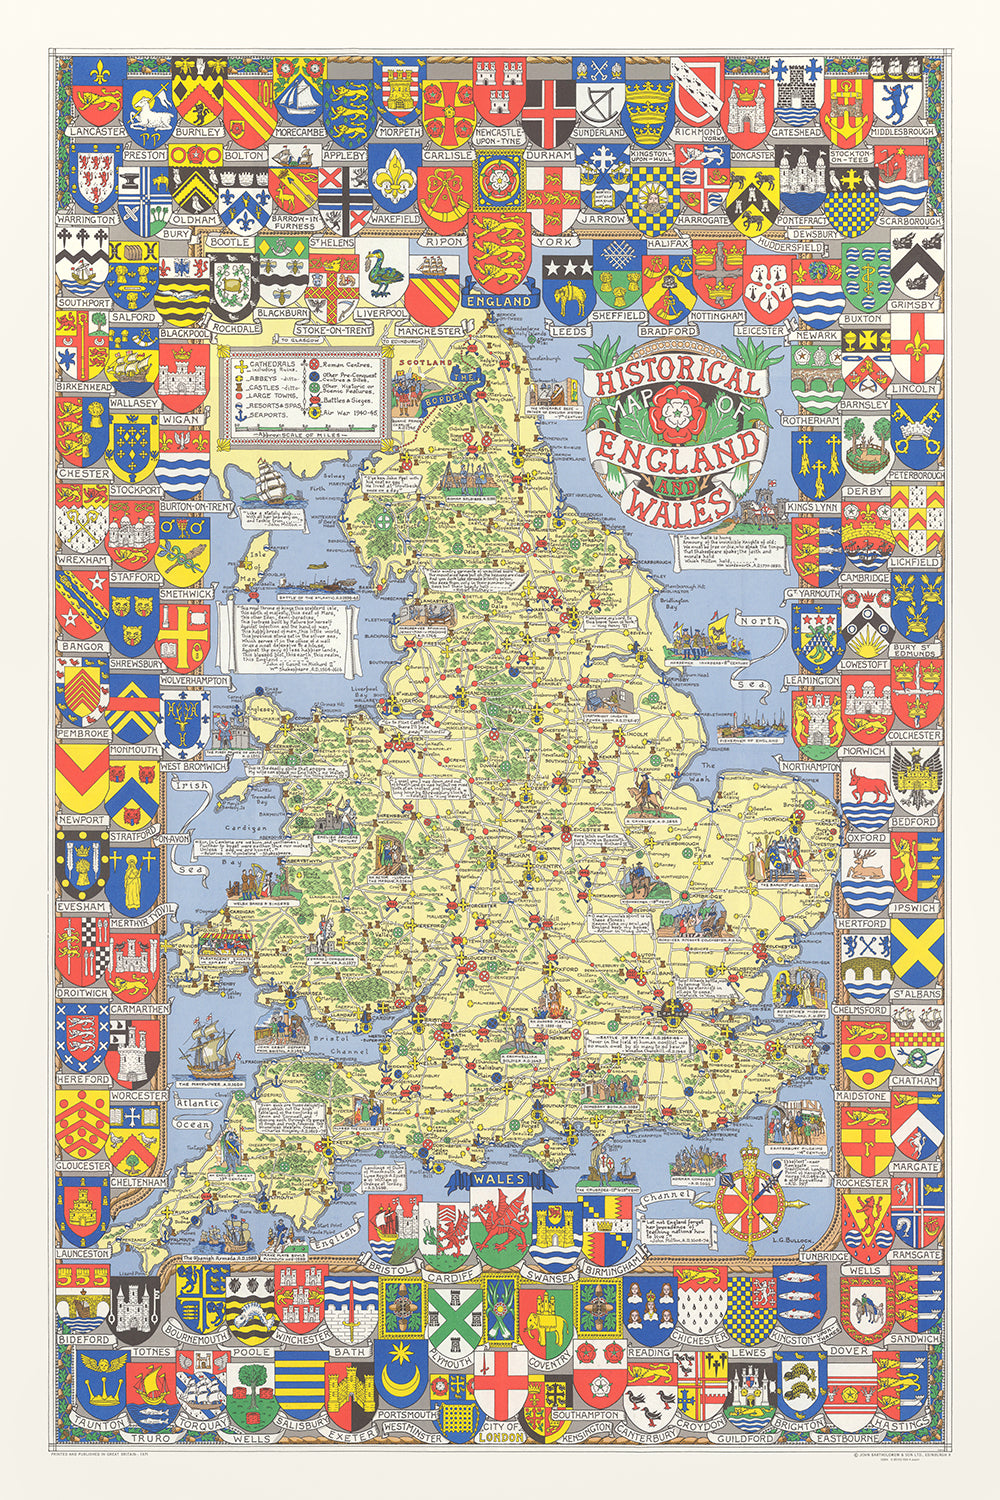 Old Historical Map of England & Wales by Bullock, 1958: Battles, Events, Famous People, City Coats of Arms